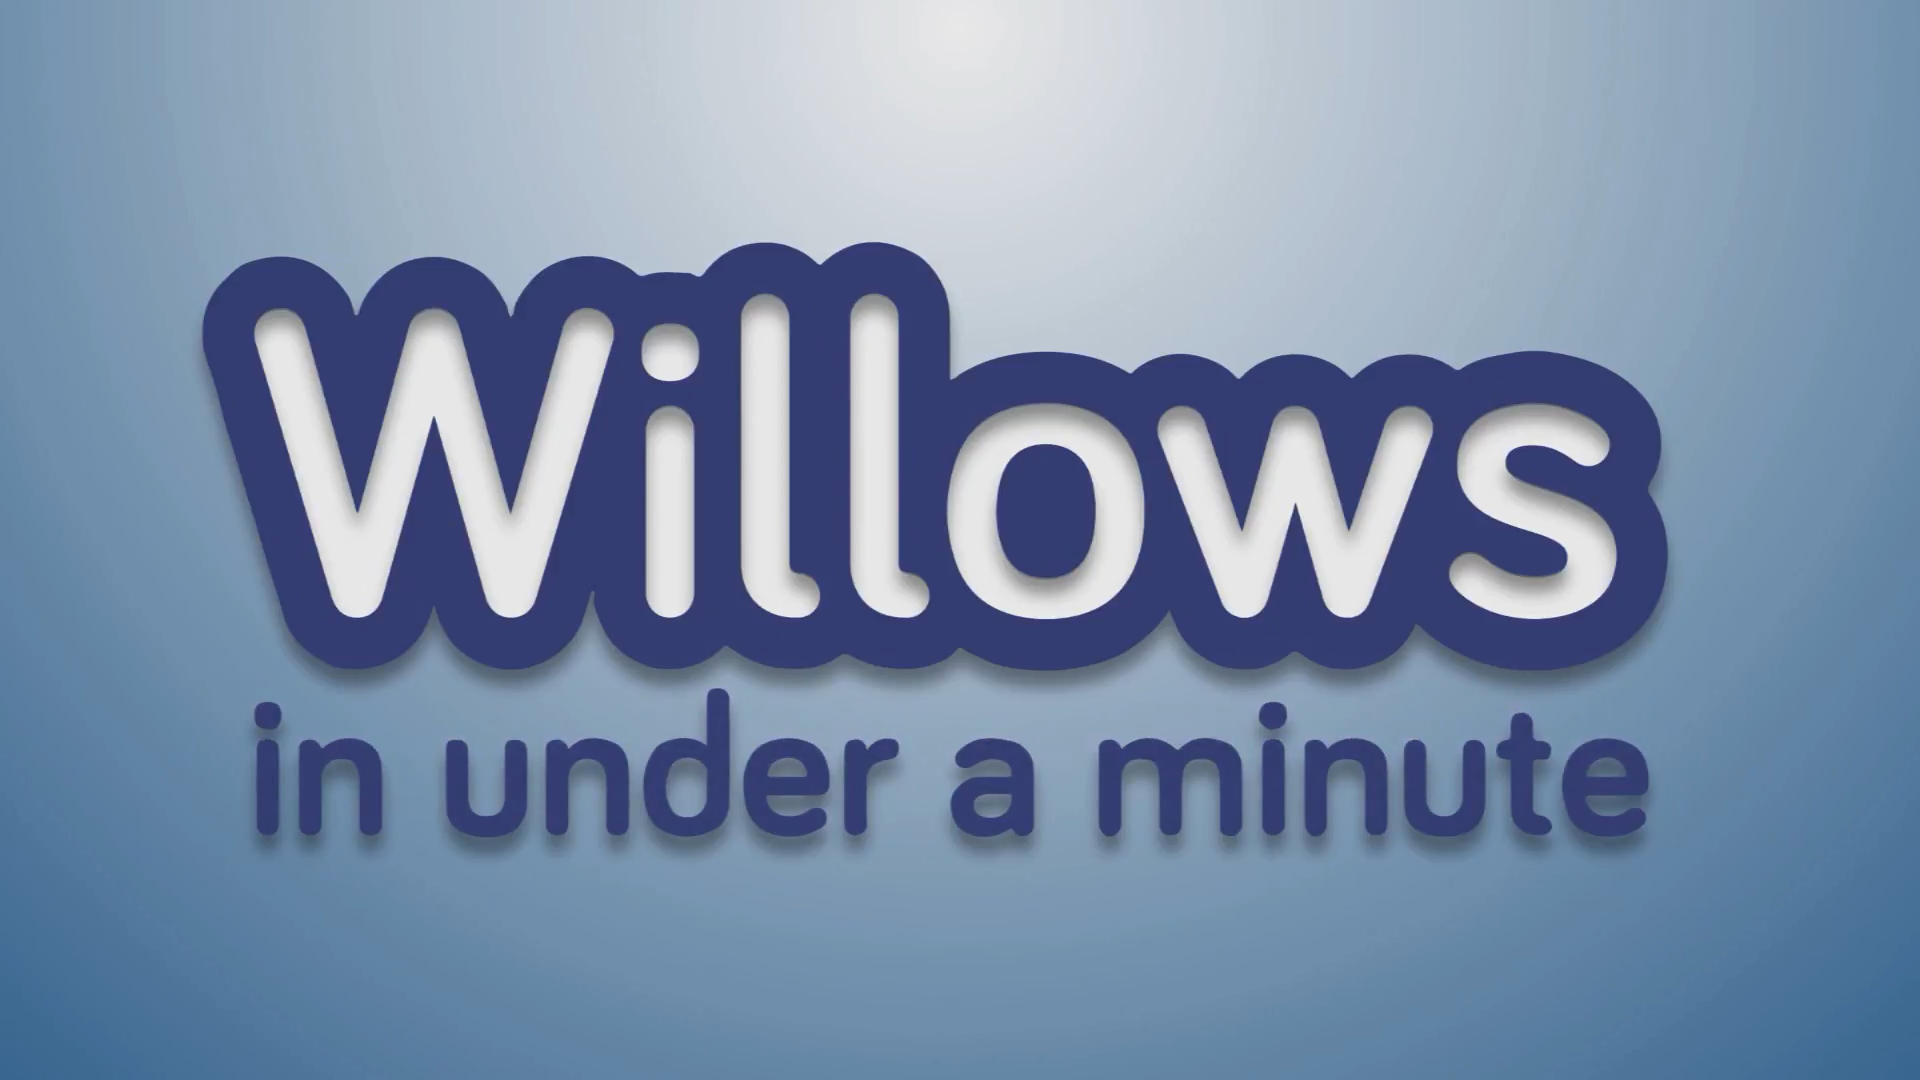 Willows in under a minute by Zakk of year 7